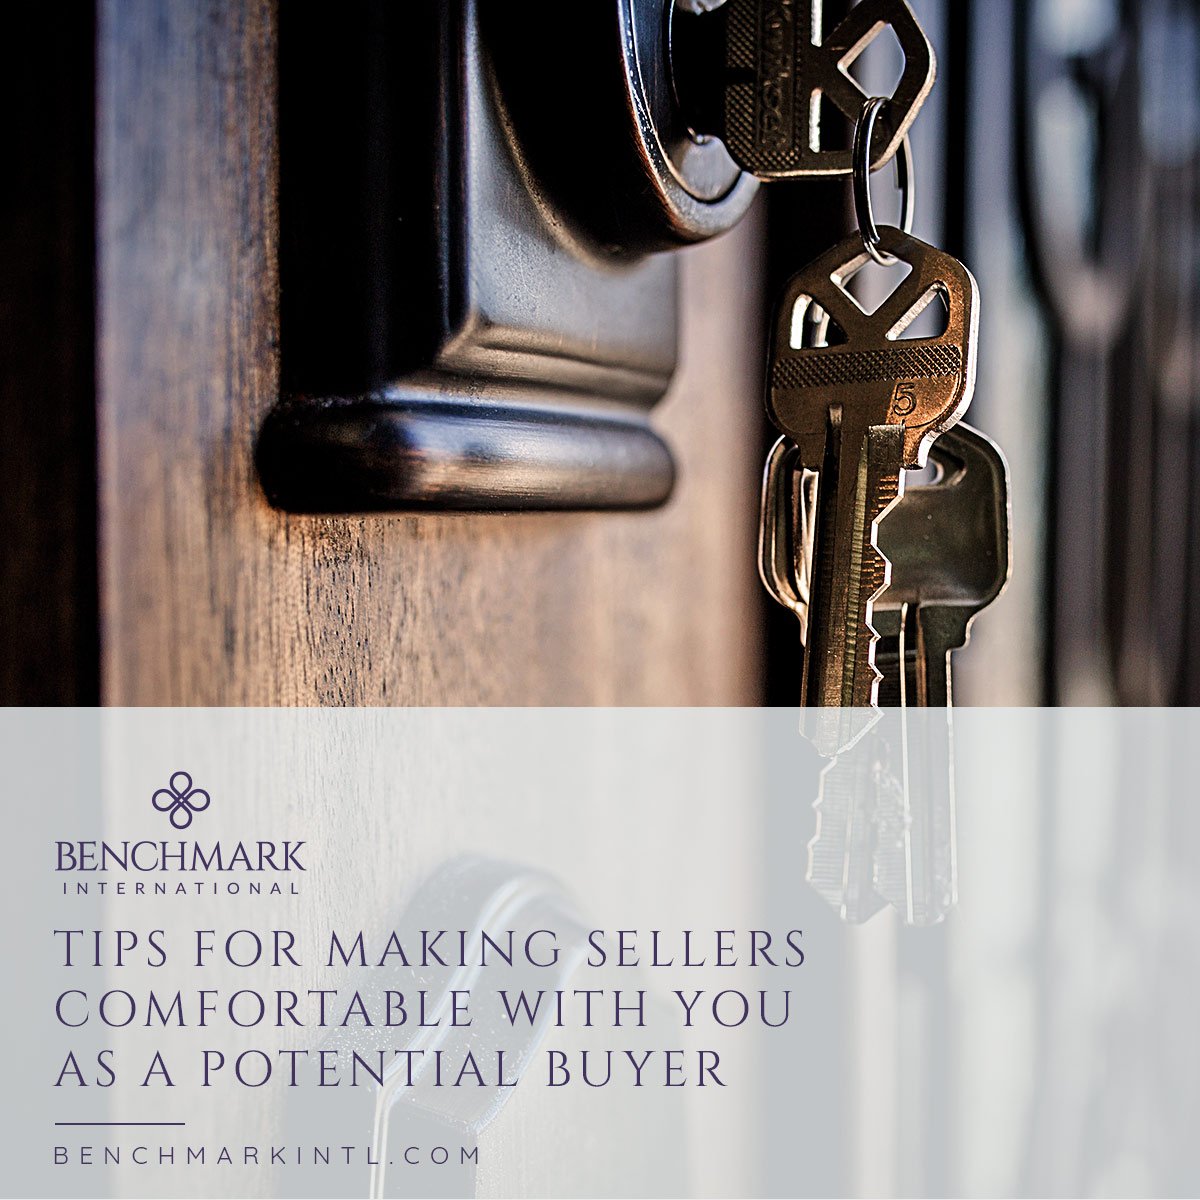 Tips_for_Making_Sellers_Comfortable_with_You_as_a_Potential_Buyer_Social(2)